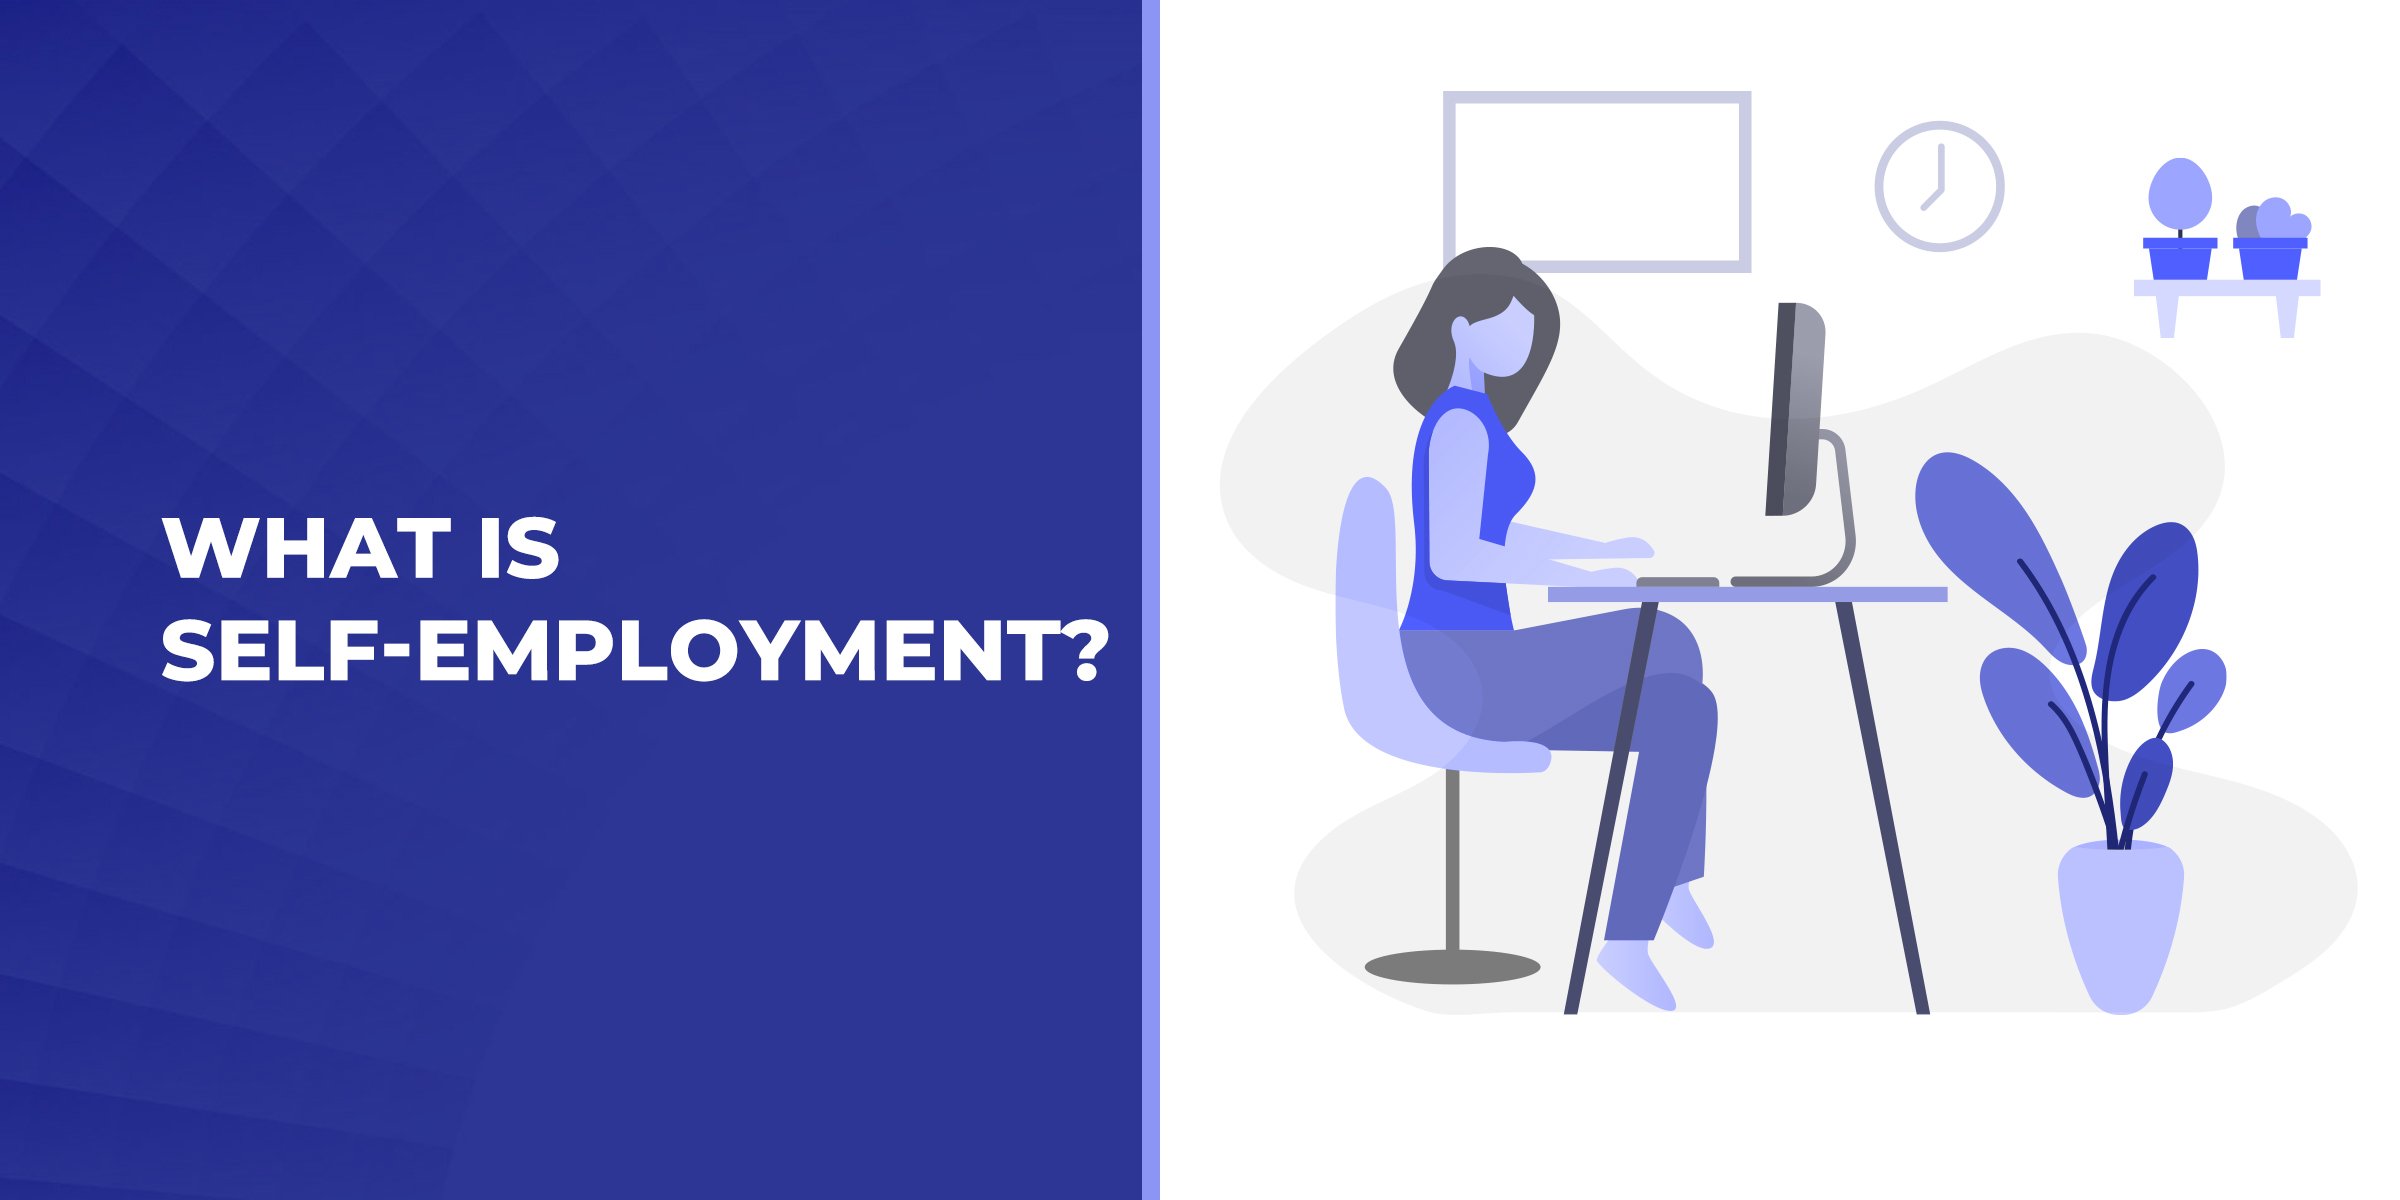 What Is Self-Employment?